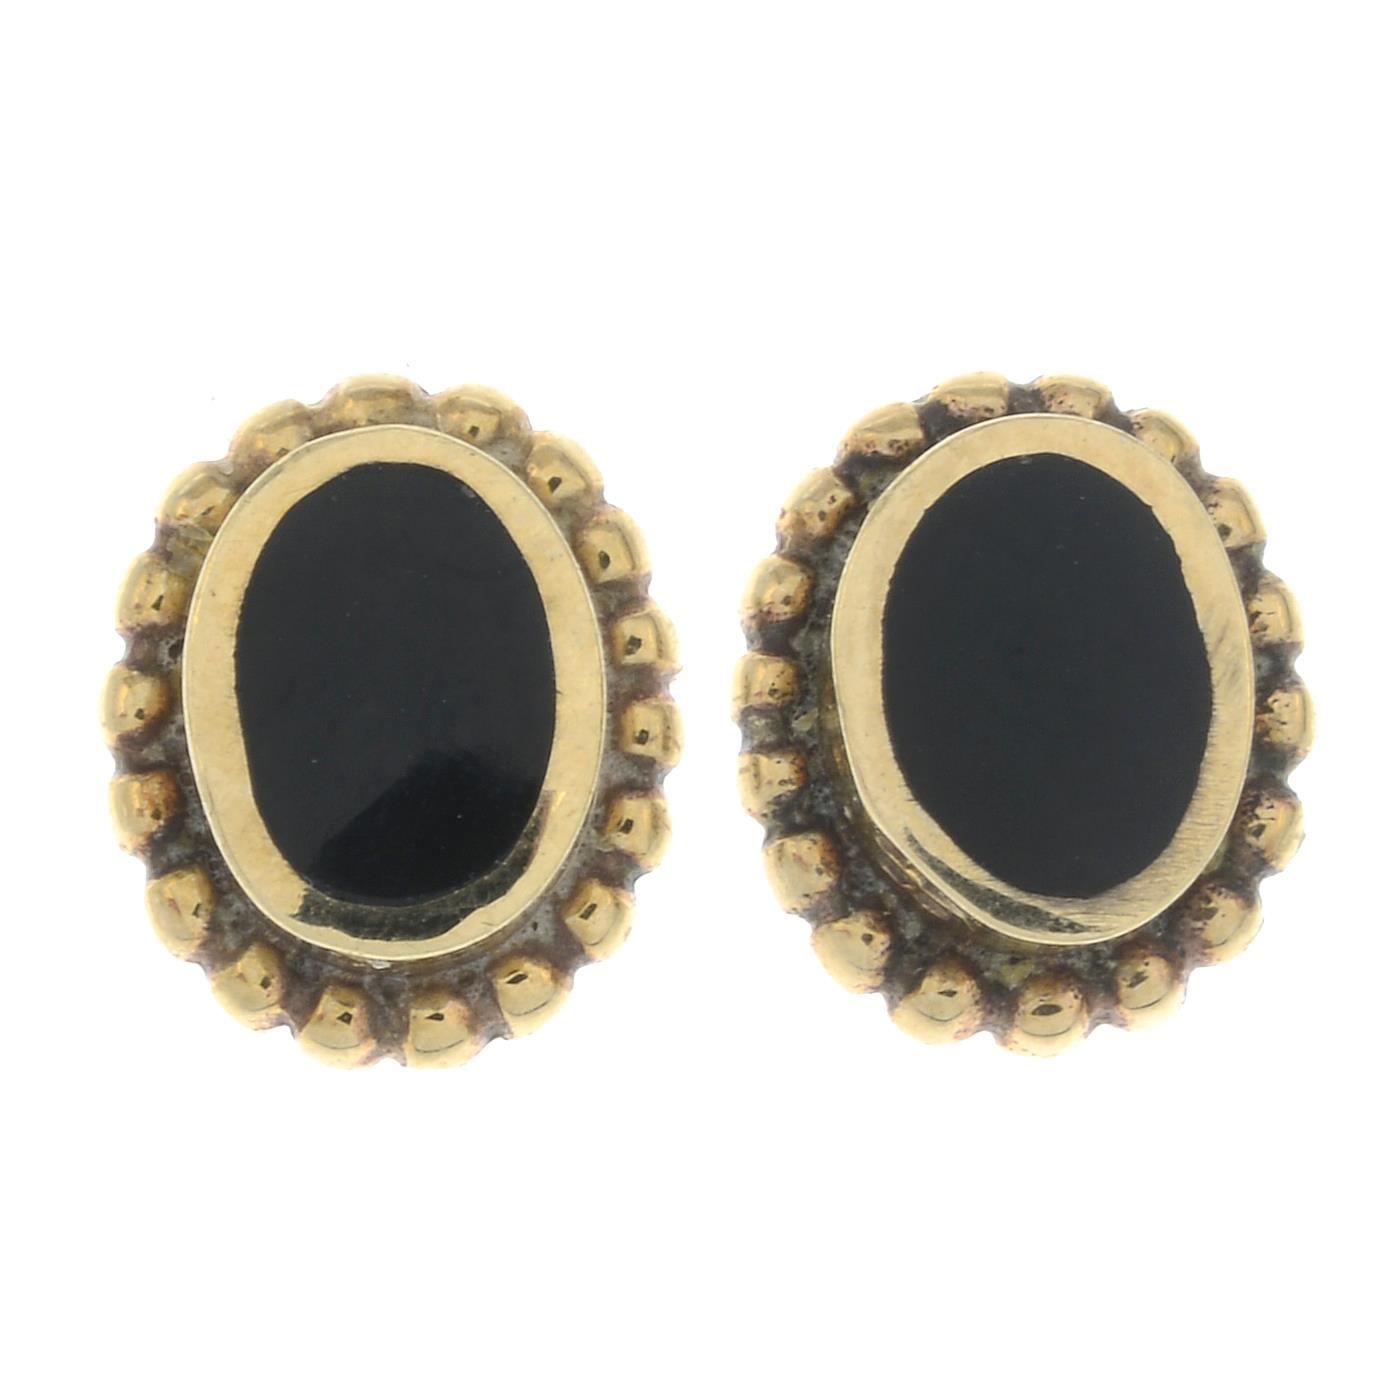 Two early 20th century gem-set brooches, together with a pair of onyx stud earrings. - Image 3 of 3